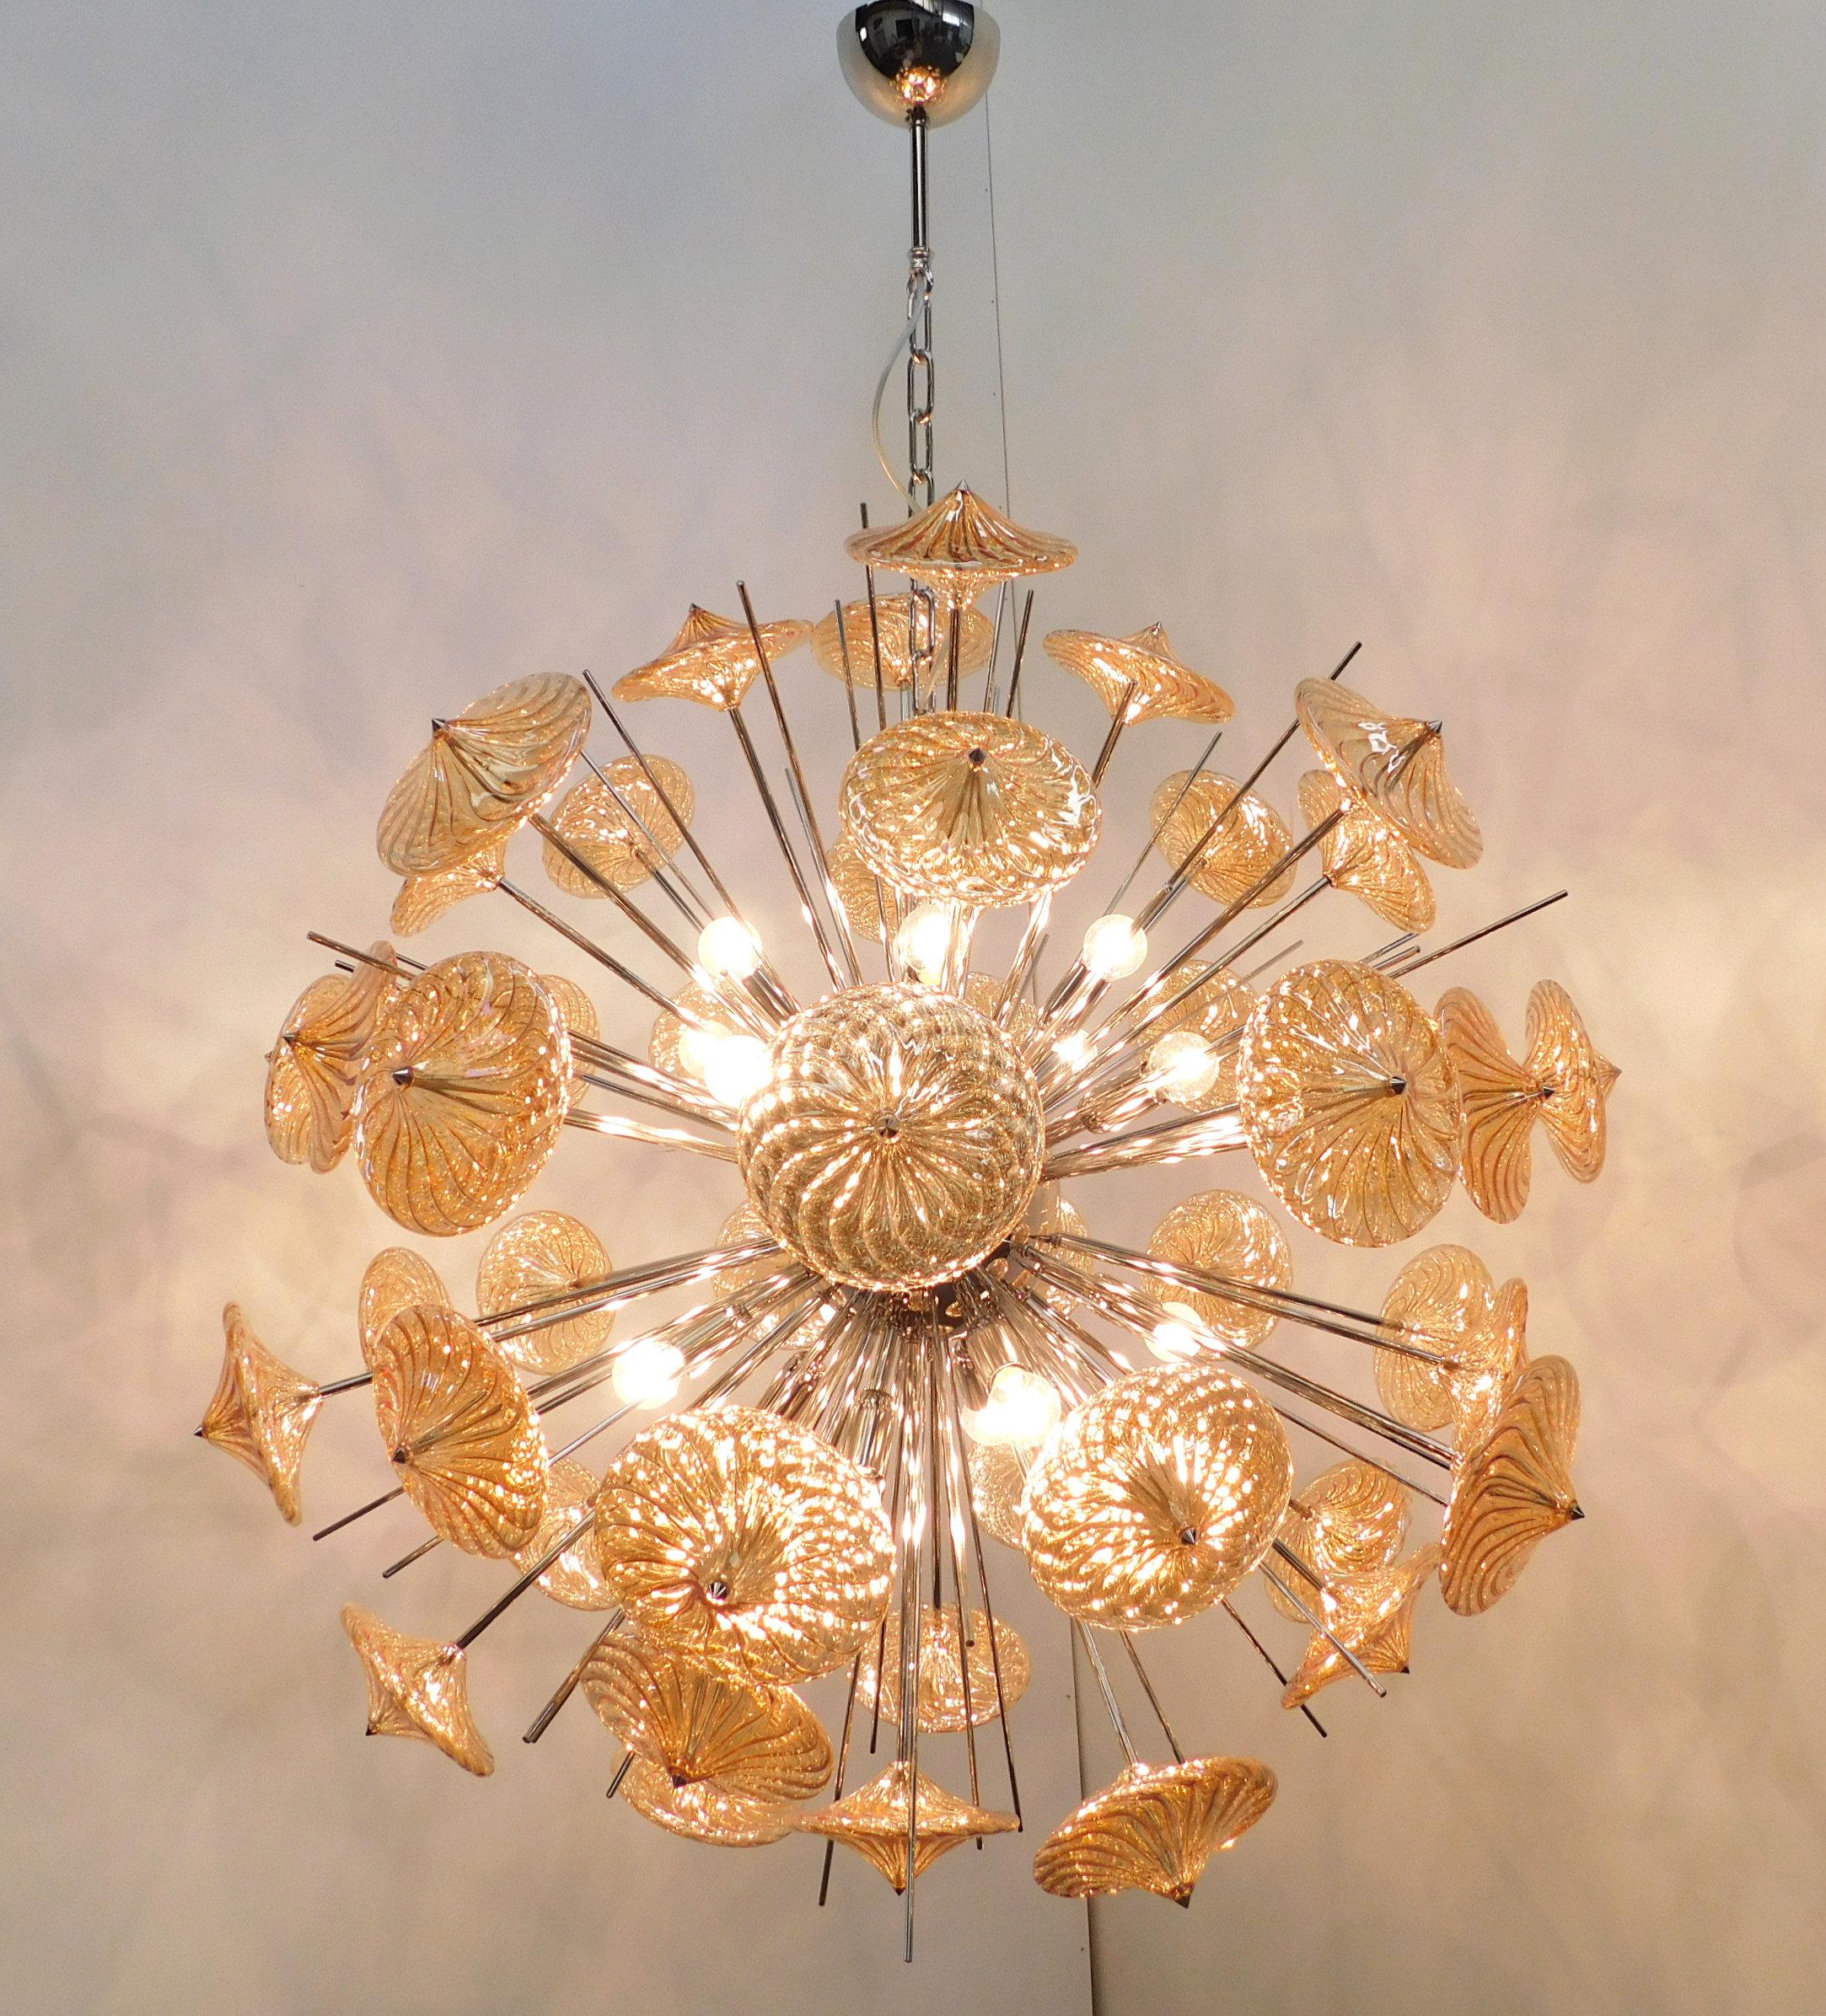 Italian modern Sputnik chandelier shown in Pyrex borosilicate glasses hand blown to produce a spiraled effect, mounted on polished nickel frame / Designed by Fabio Bergomi for Fabio Ltd / Made in Italy
16 lights / E26 or E27 type / max 60W